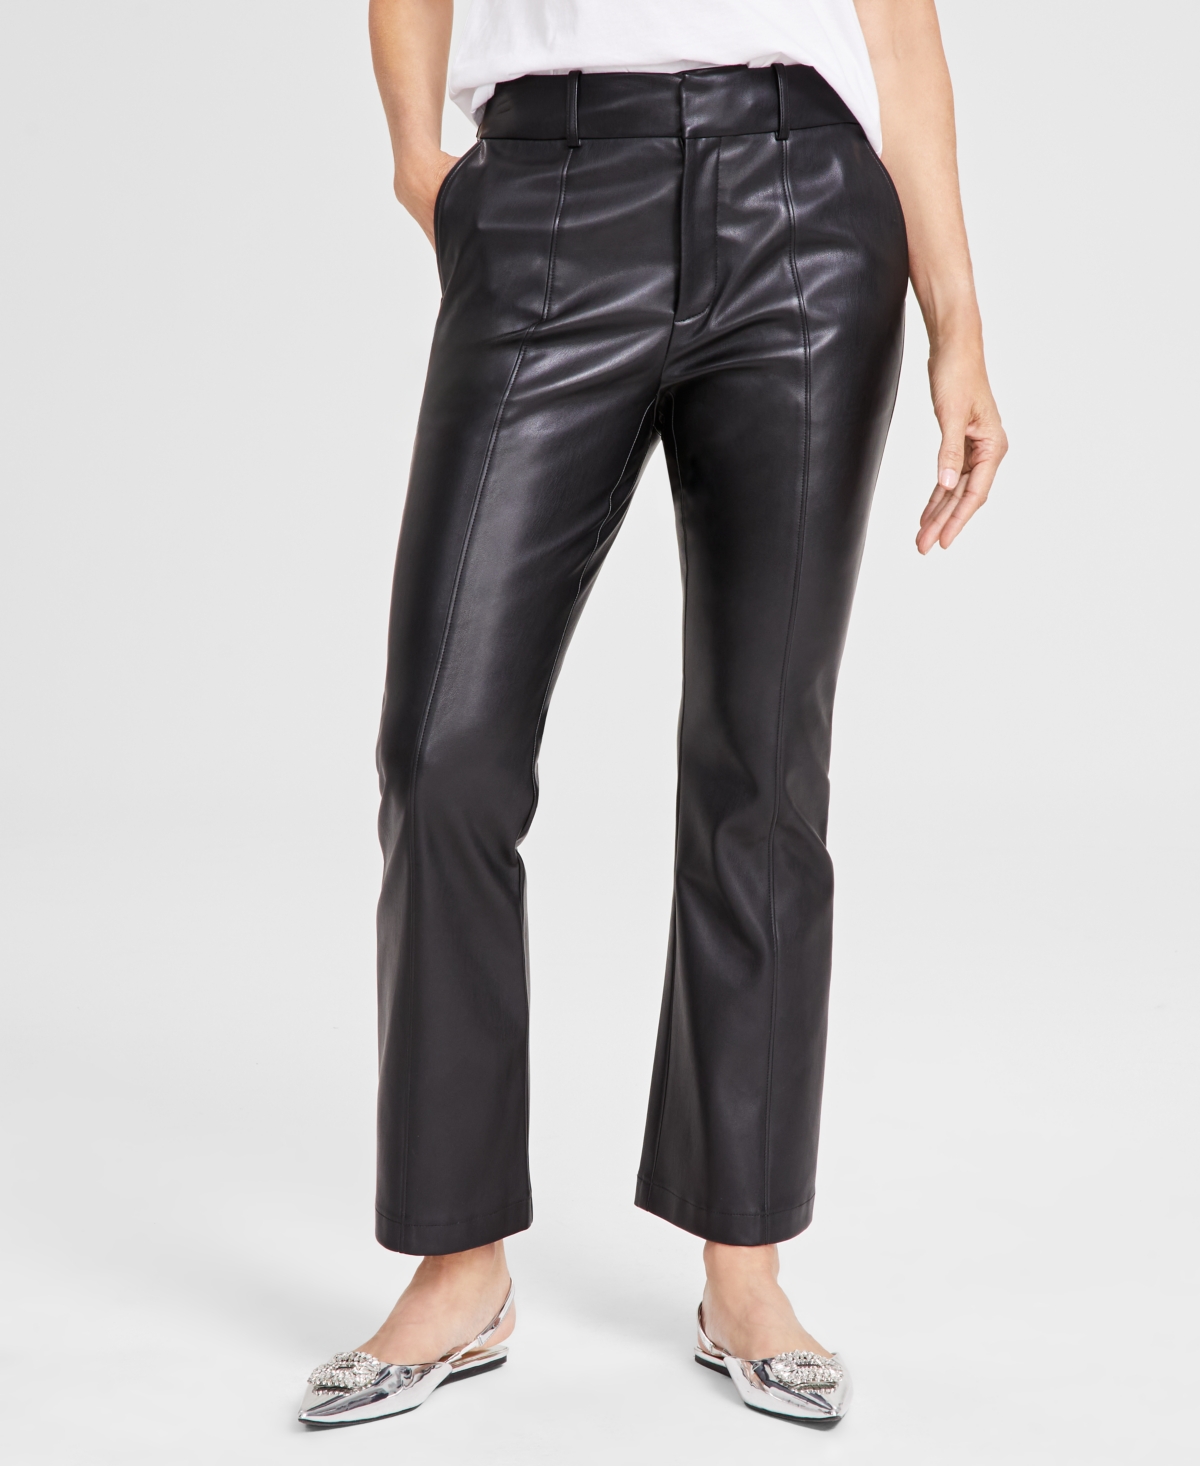 Women's Faux-Leather Kick-Flare Pants, Created for Macy's - Cocoa Bean